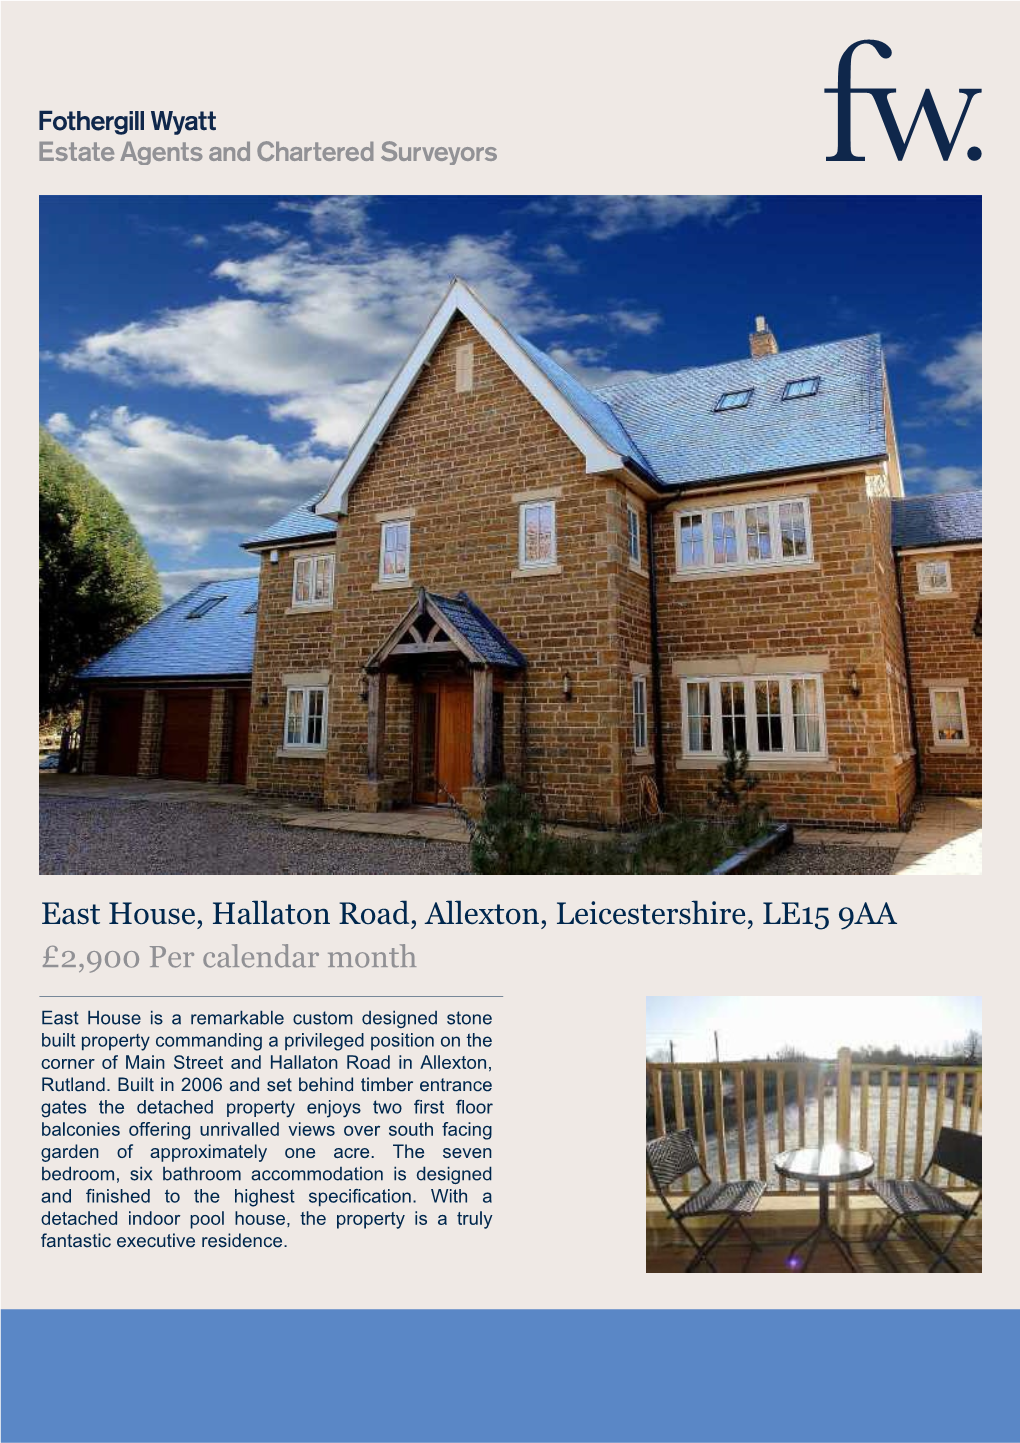 East House, Hallaton Road, Allexton, Leicestershire, LE15 9AA £2,900 Per Calendar Month